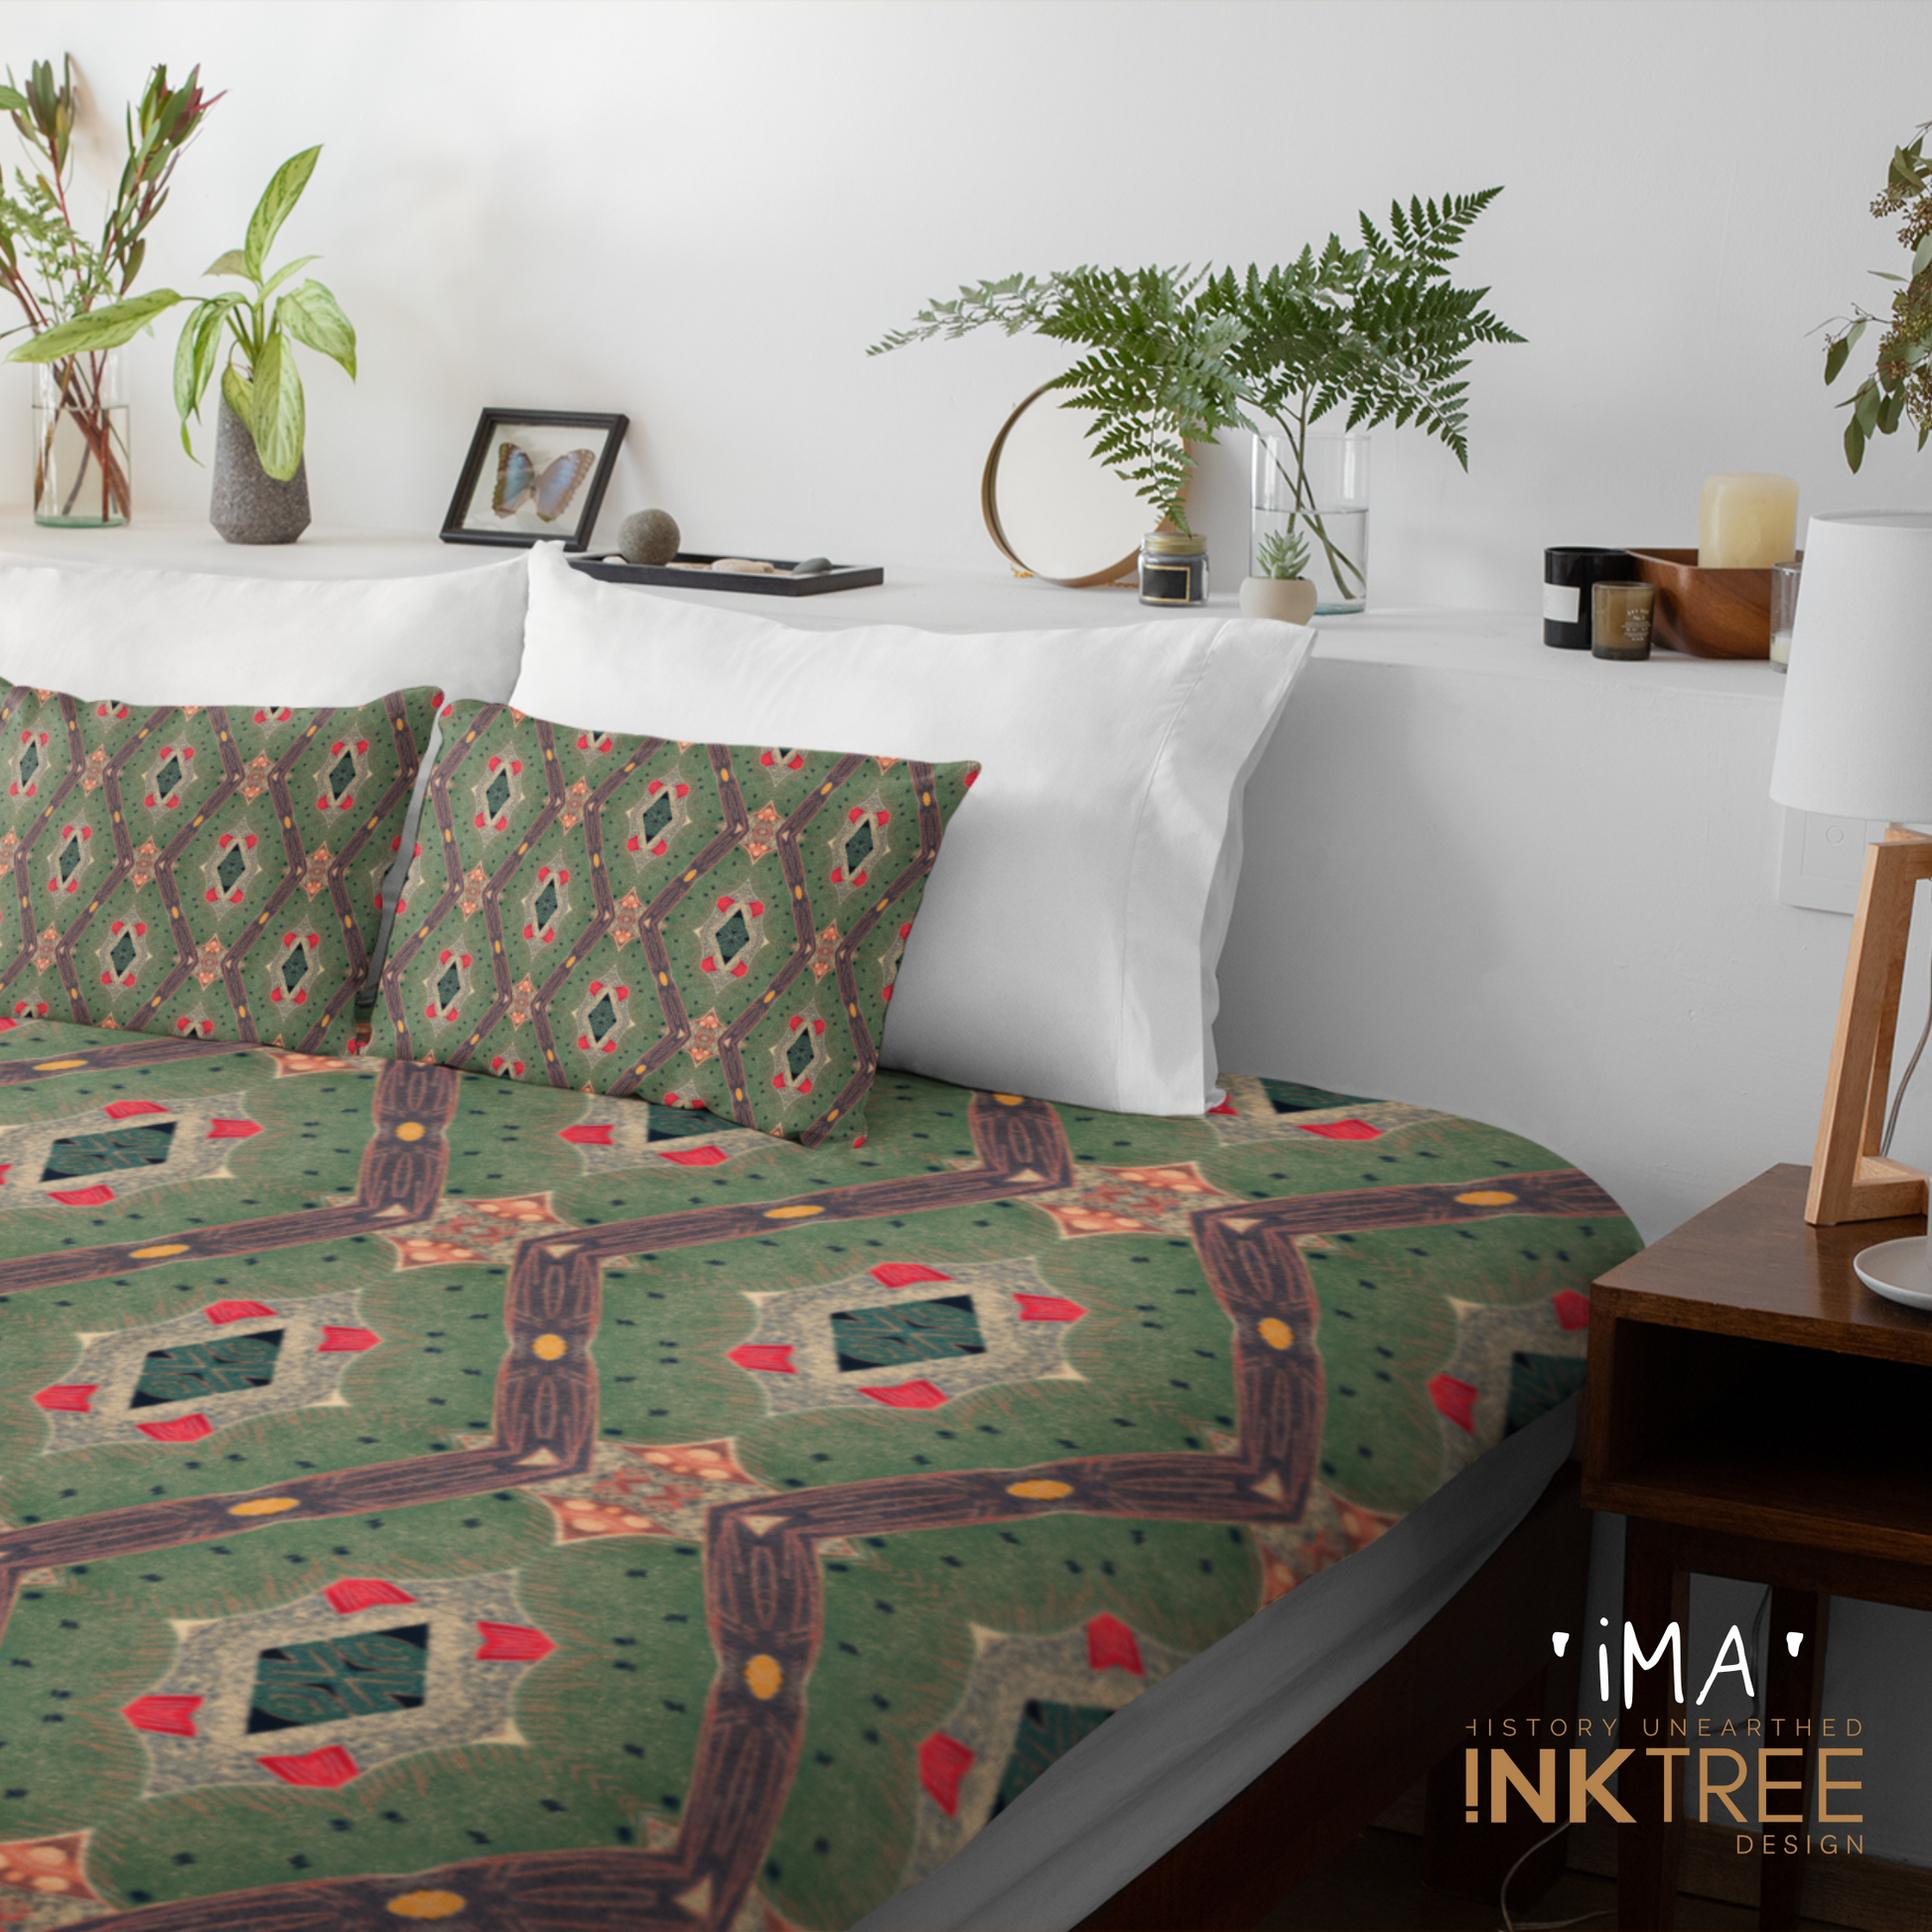 A quilt or doona cover and front pillows with a gold, black, red, green and white oriental looking pattern on a bed with a white wall, white pillows and white backboard background. There is a lamp with a white shade and wood base and plants and a small round metal mirror on the back board. There is also a ima, history unearthed ink tree design logo in the bottom right hand corner on it.